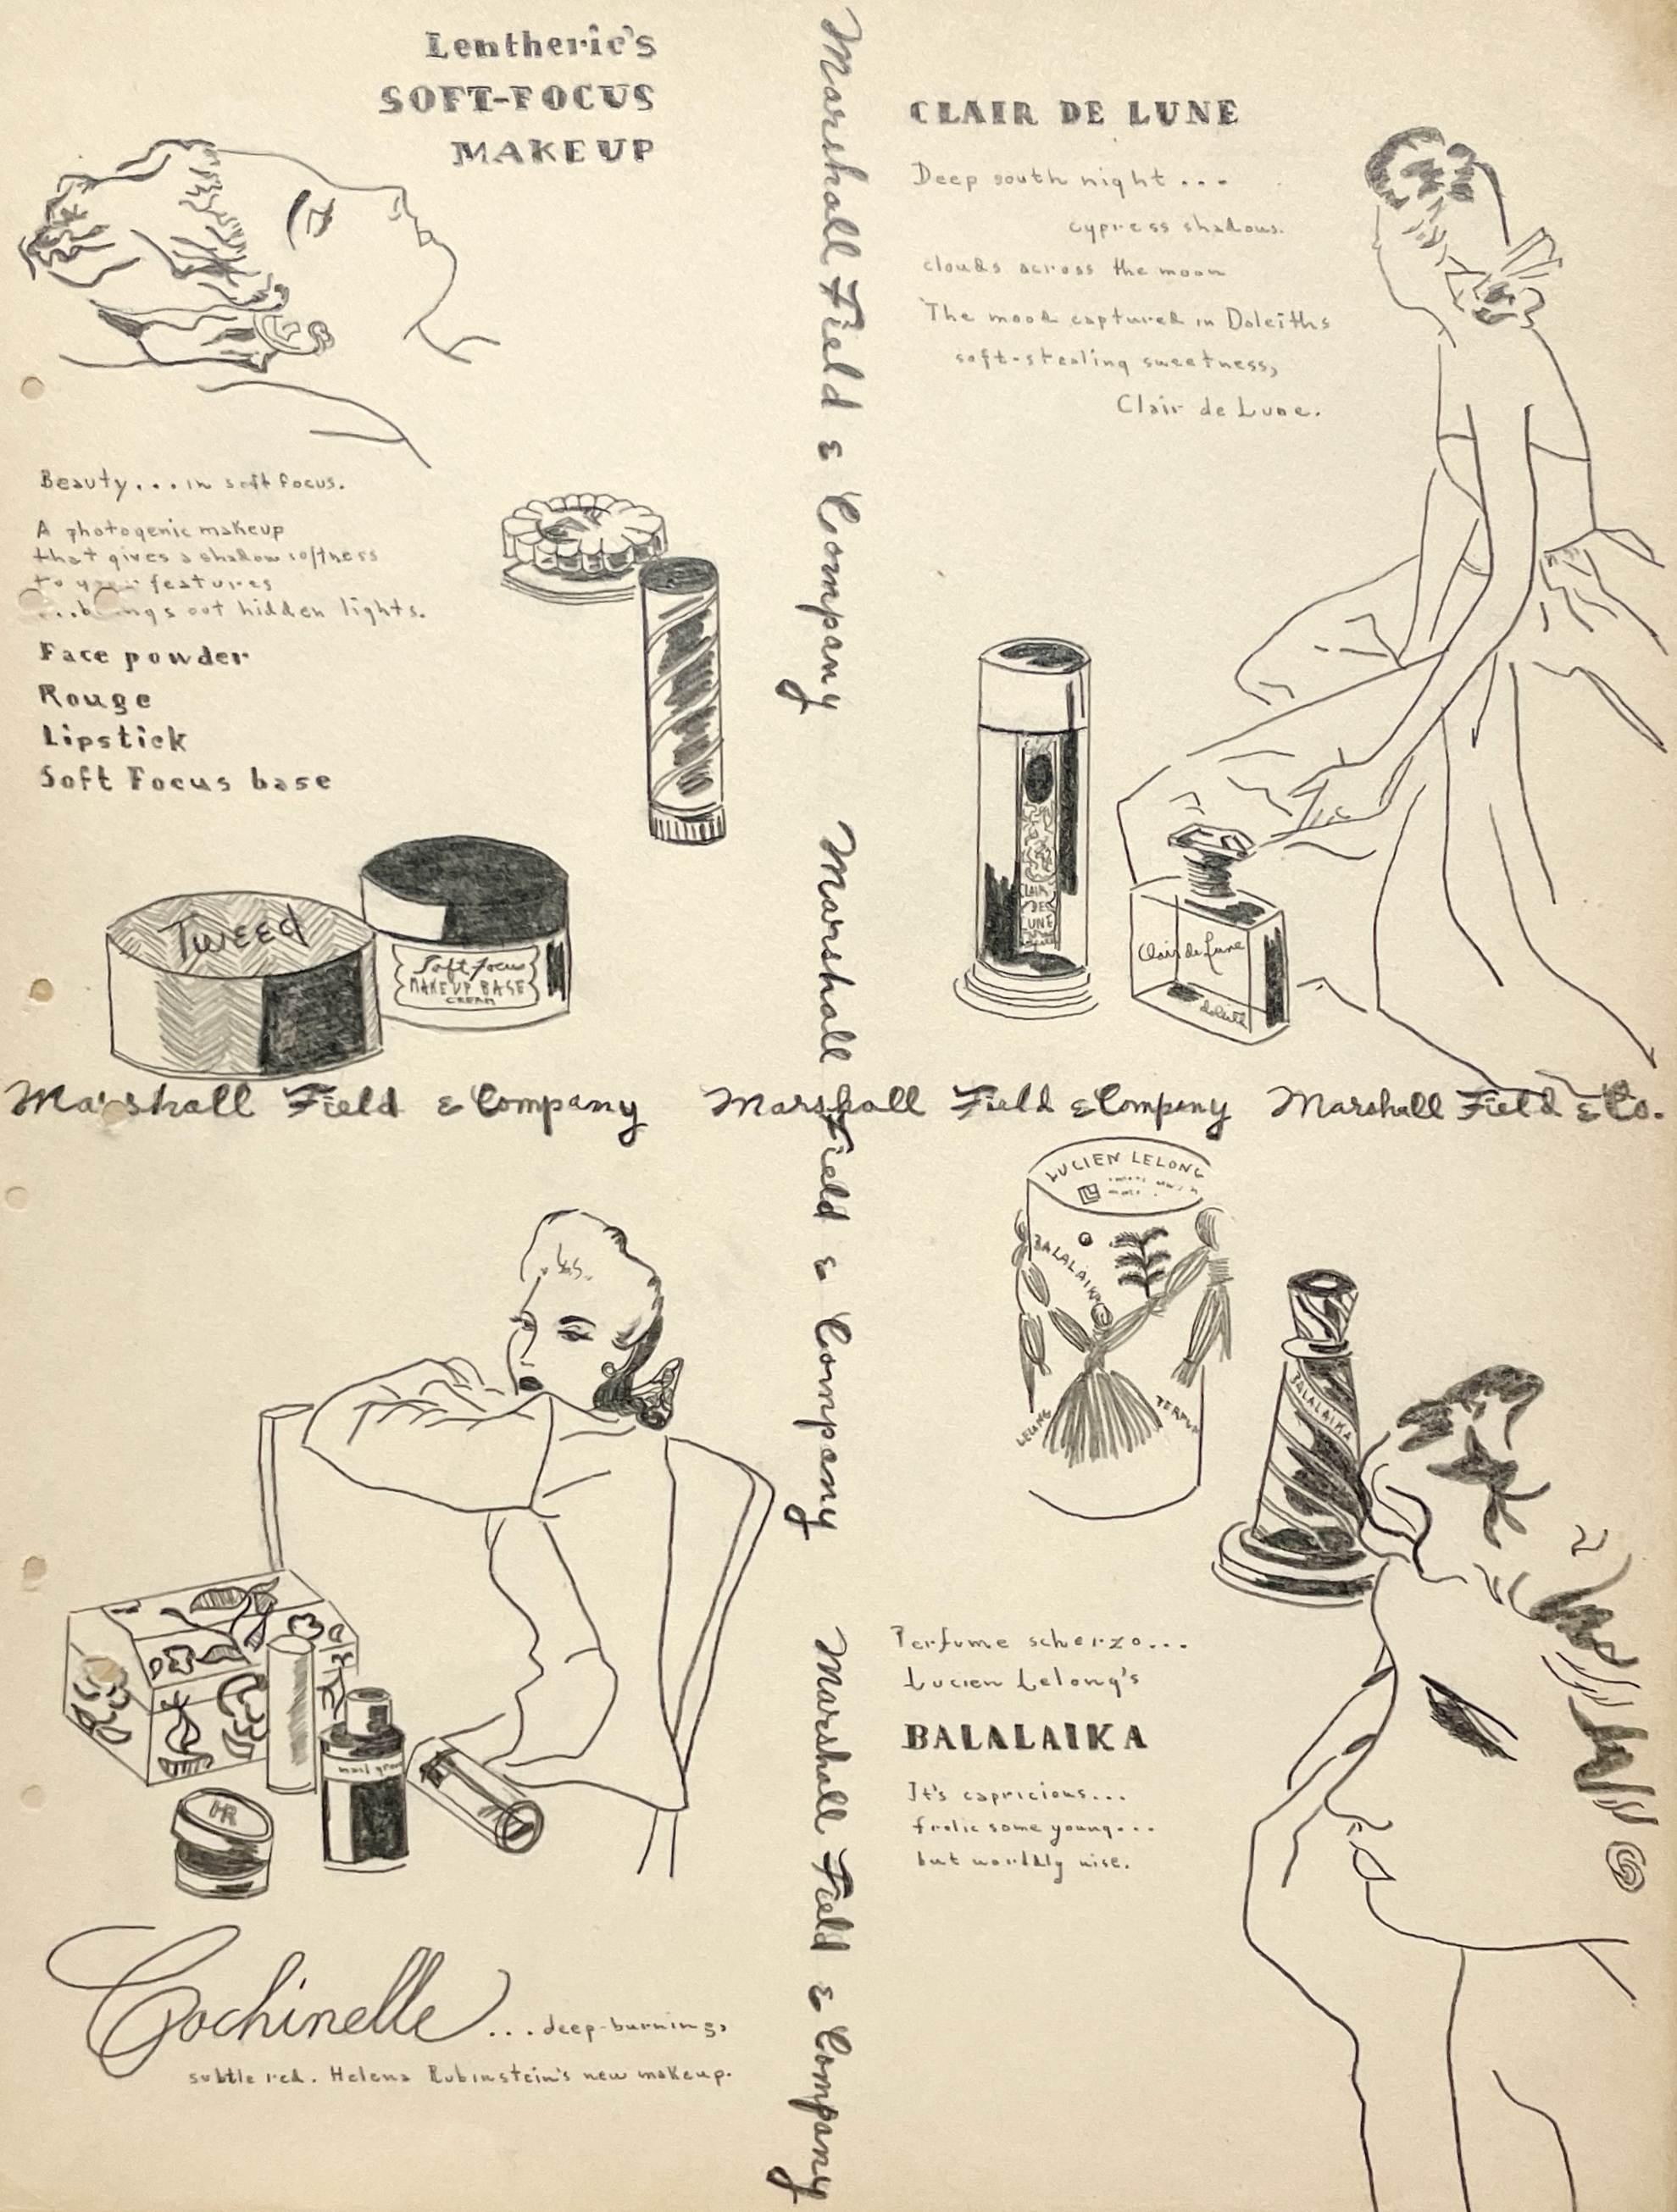 Unknown Figurative Art - 1940s Fashion Study for Perfume Advertisement at Marshall Field & Company